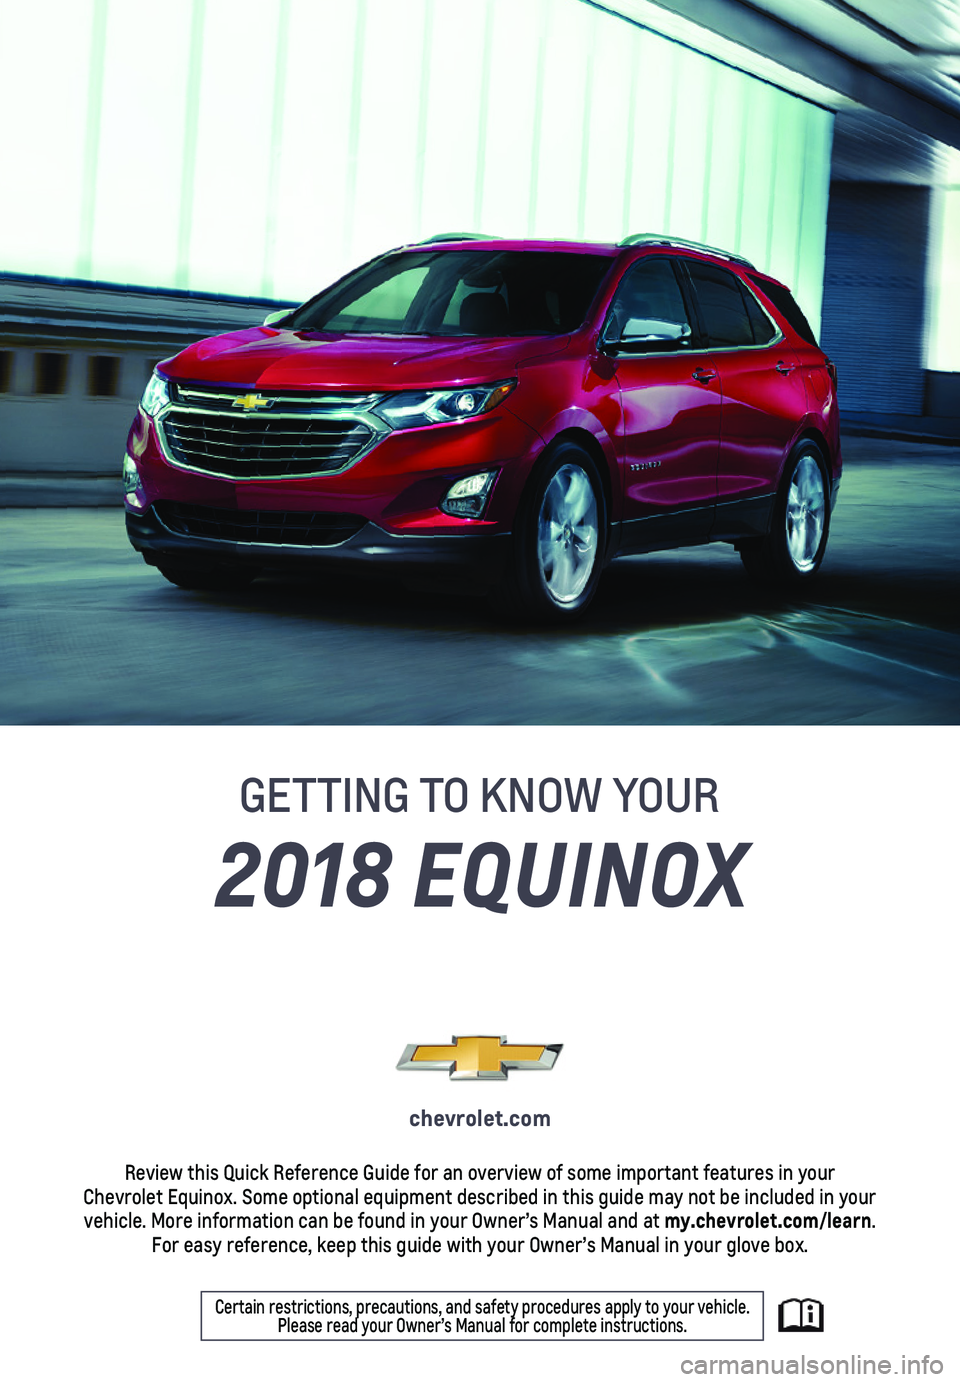 CHEVROLET EQUINOX 2018  Get To Know Guide 1
2018 EQUINOX
GETTING TO KNOW YOUR
chevrolet.com
Review this Quick Reference Guide for an overview of some important feat\
ures in your  Chevrolet Equinox. Some optional equipment described in this g